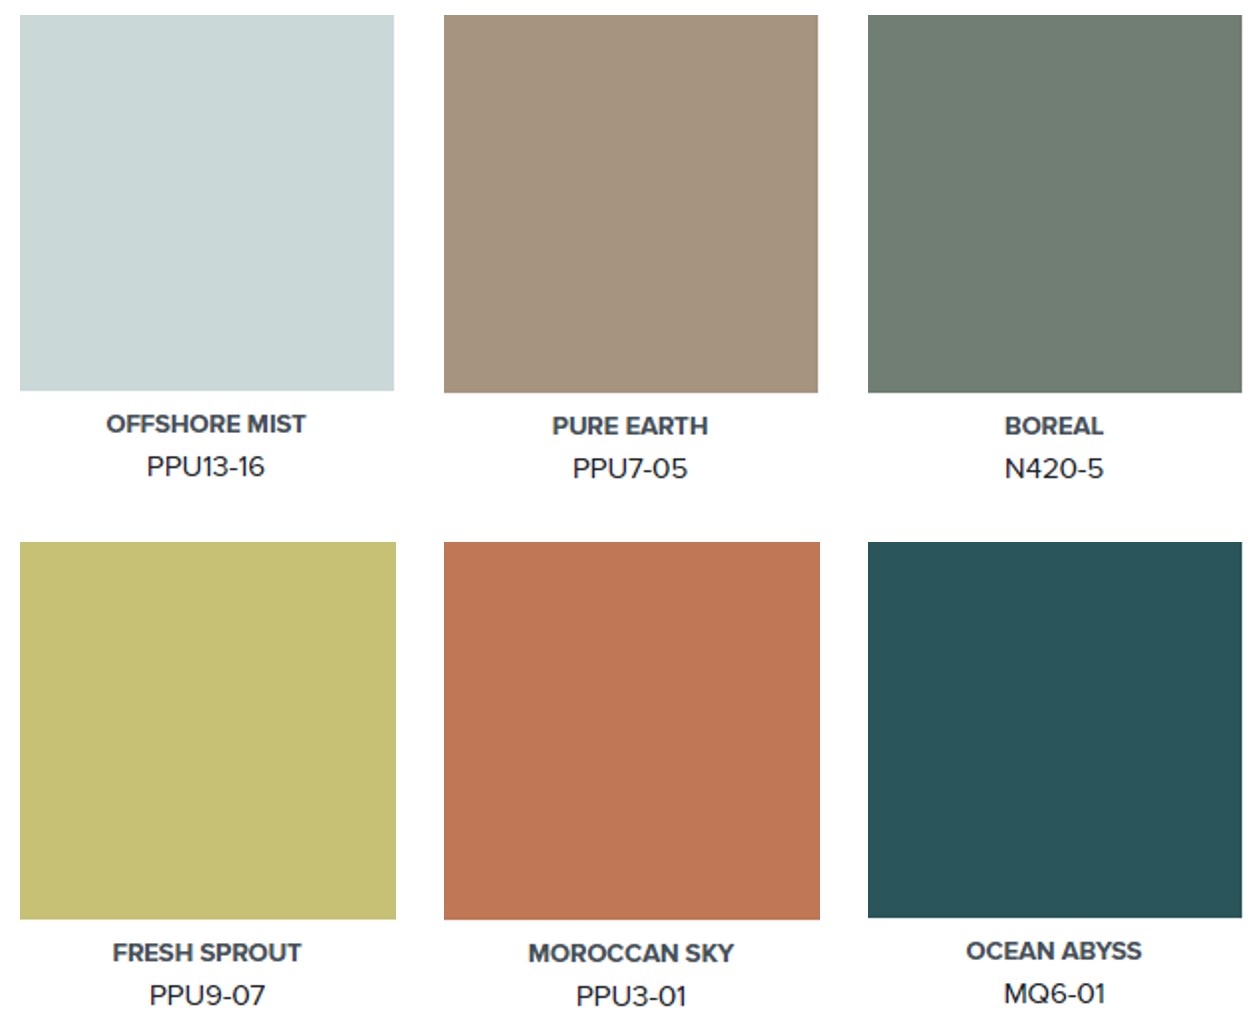 A palette of six colours – Offshore Mist, Pure Earth, Boreal, Fresh Sprout, Moroccan Sky, Ocean Abyss